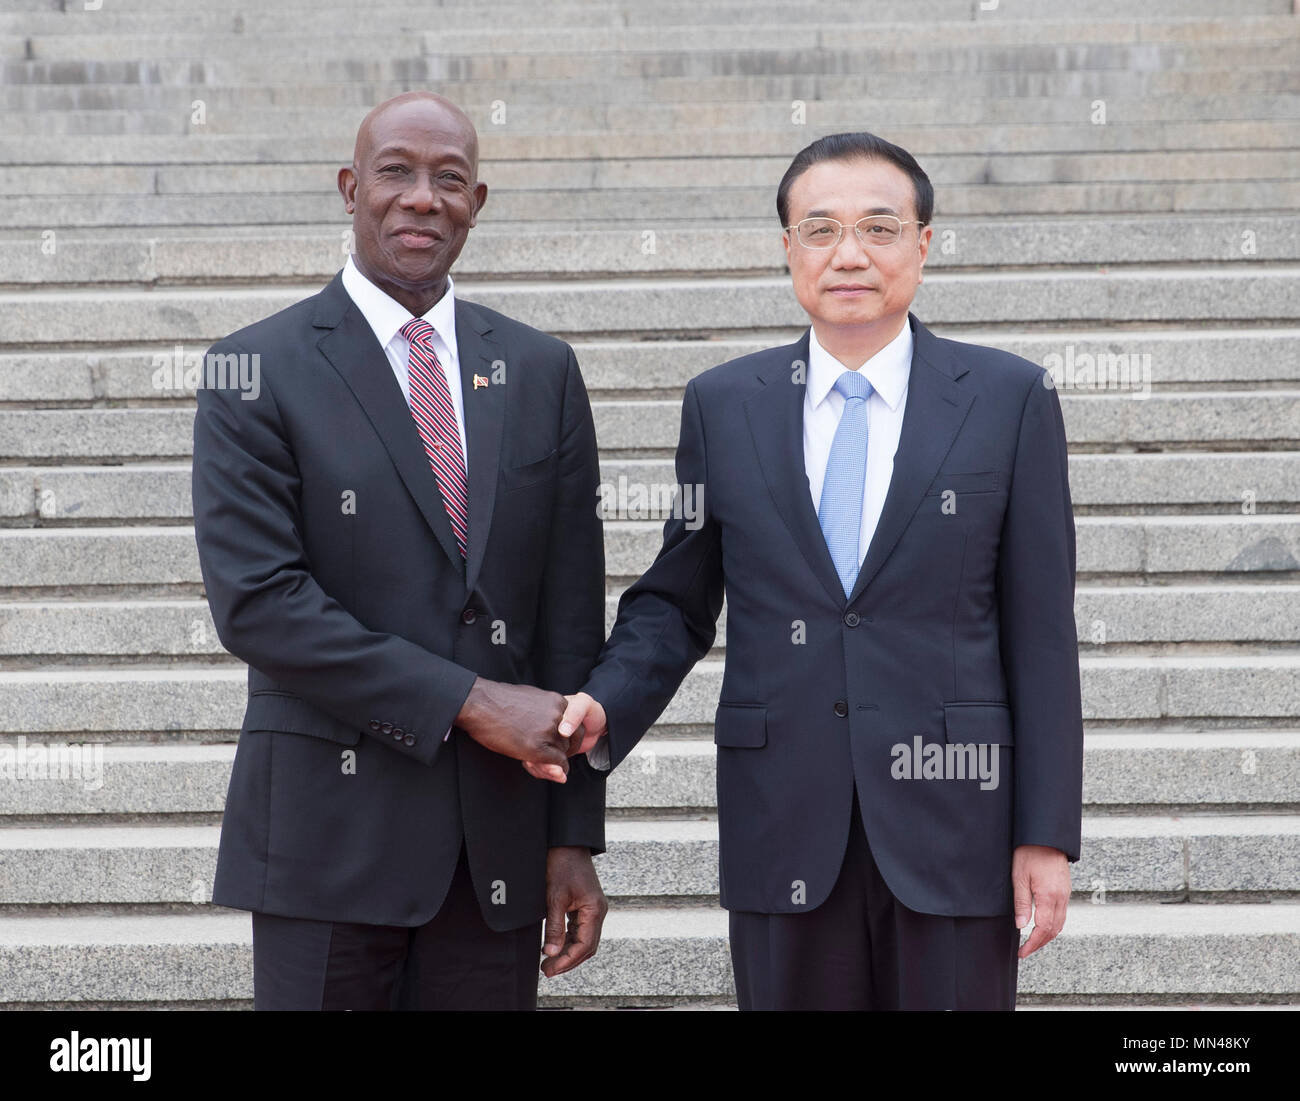 Beijing, China. 14th May, 2018. Chinese Premier Li Keqiang (R) holds a welcome ceremony for Prime Minister Keith Rowley of Trinidad and Tobago before their talks in Beijing, capital of China, May 14, 2018. Credit: Wang Ye/Xinhua/Alamy Live News Stock Photo